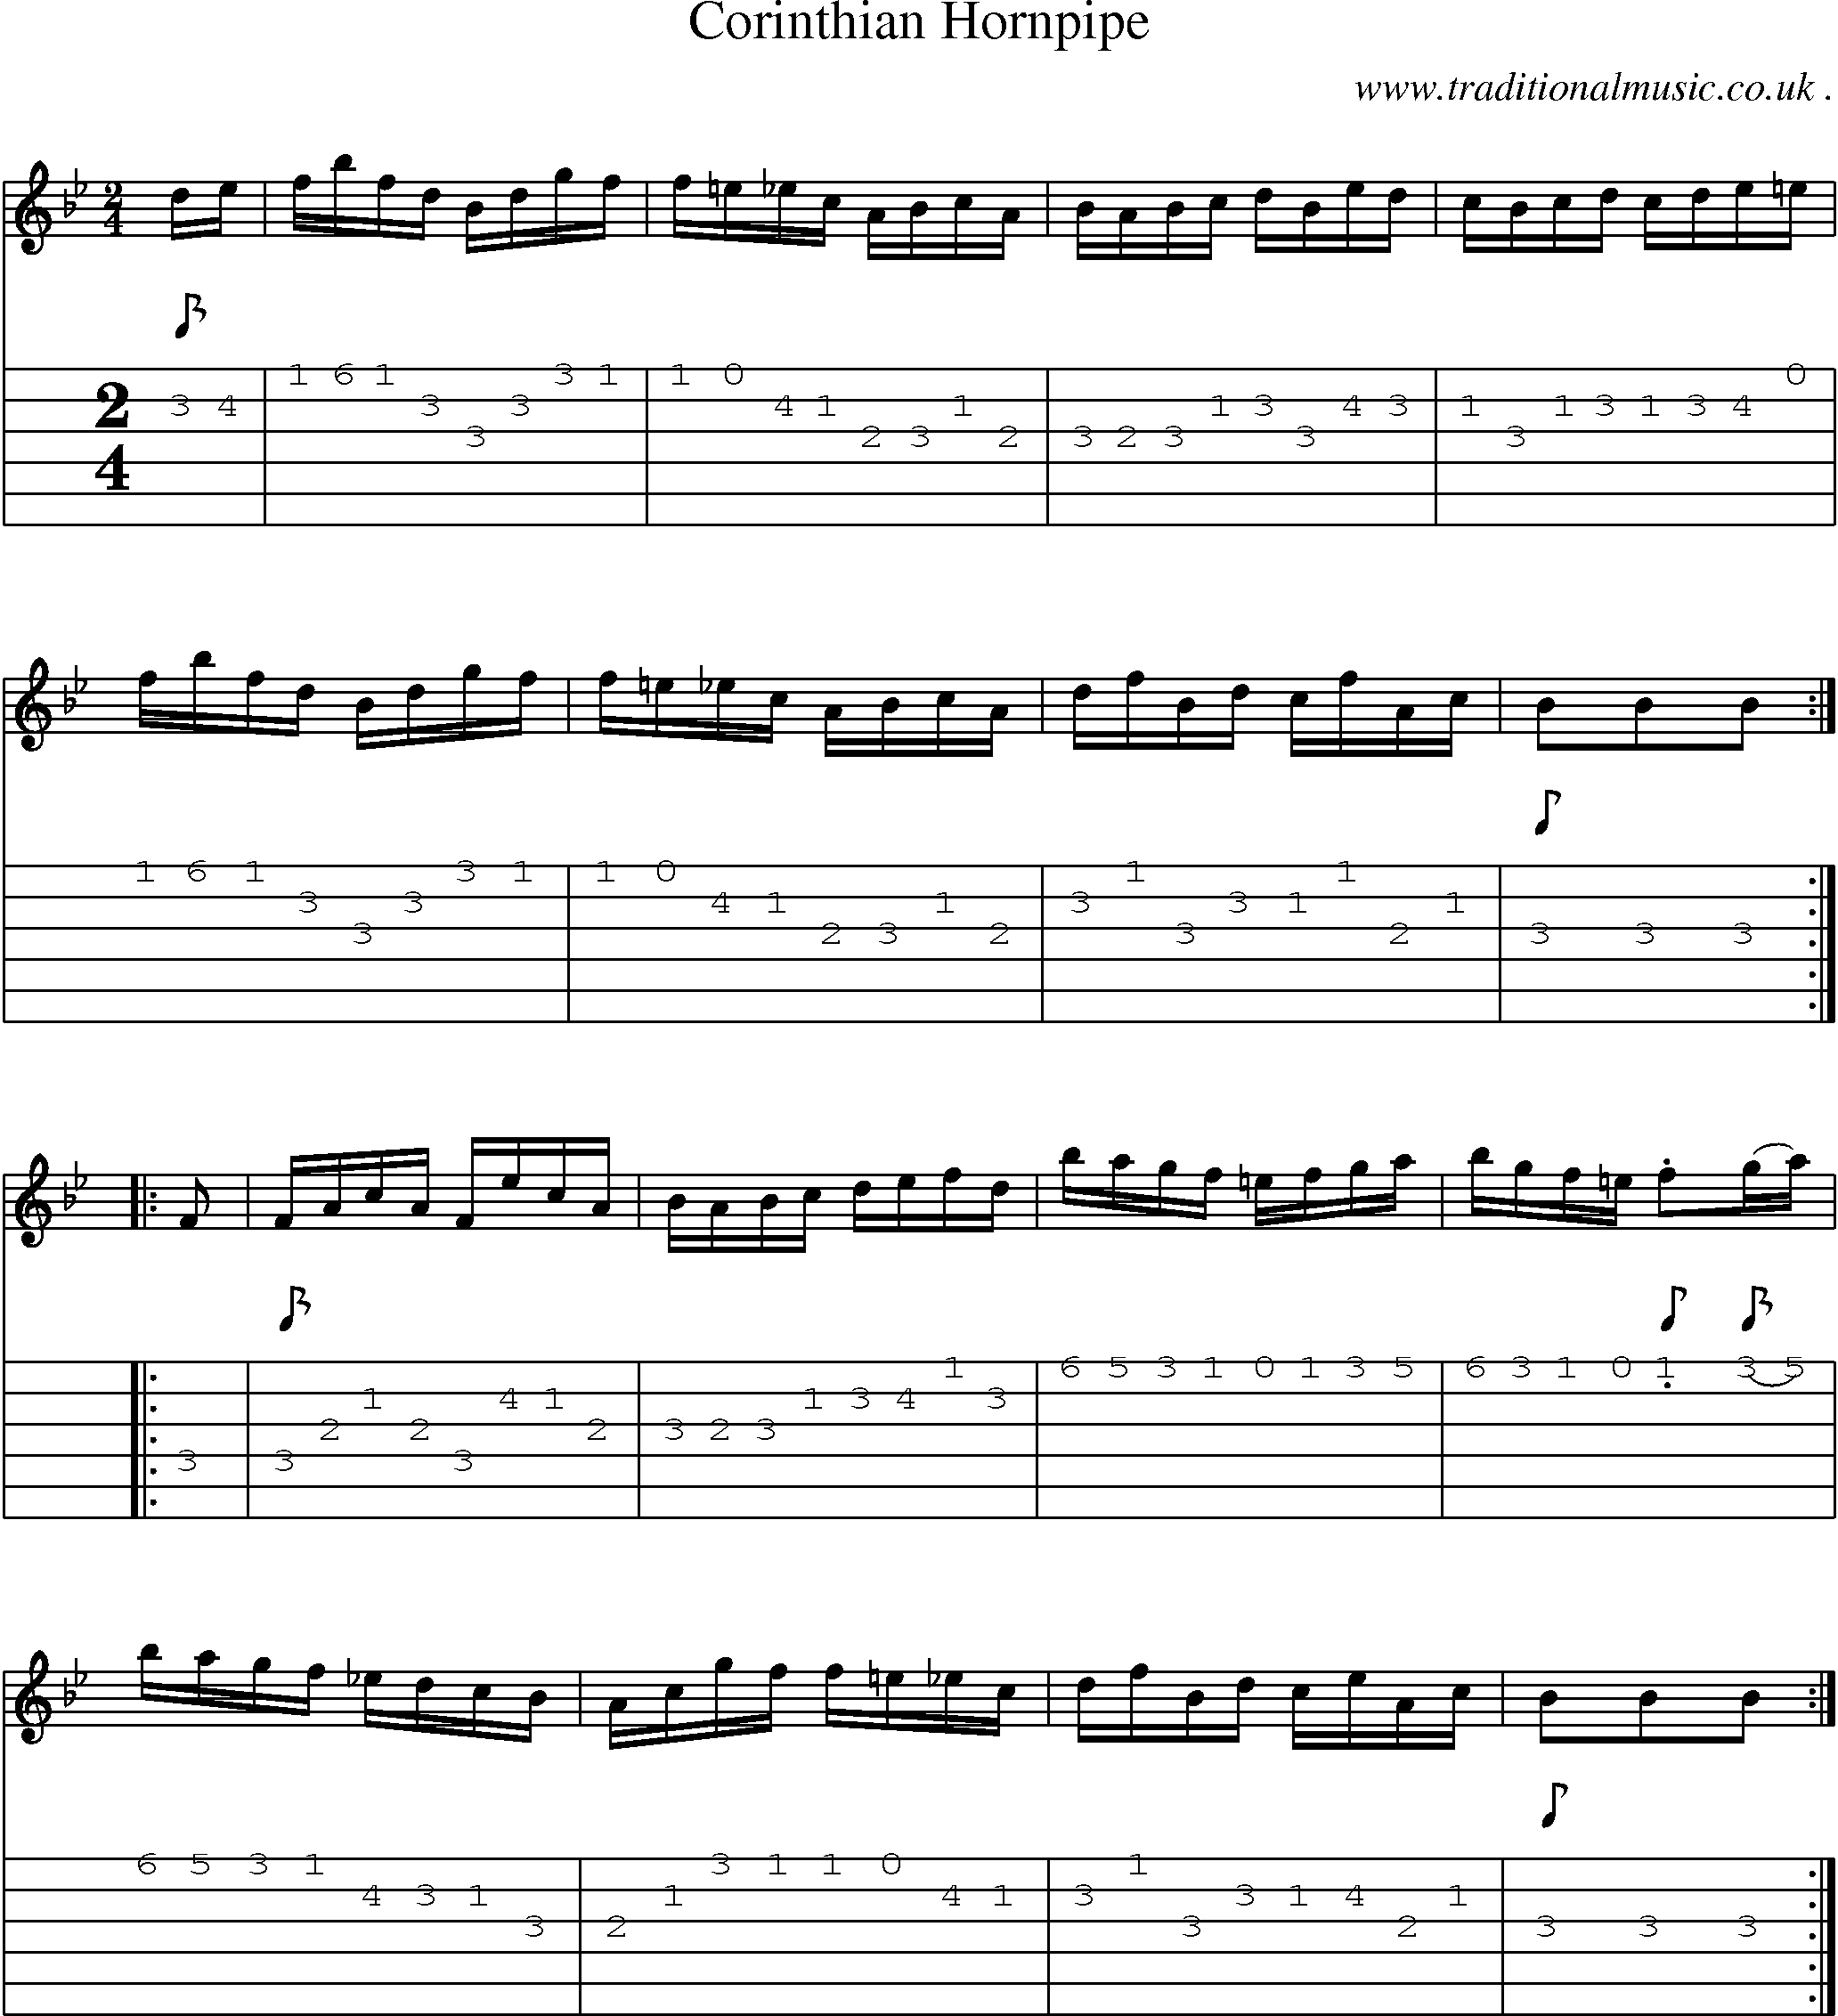 Sheet-Music and Guitar Tabs for Corinthian Hornpipe